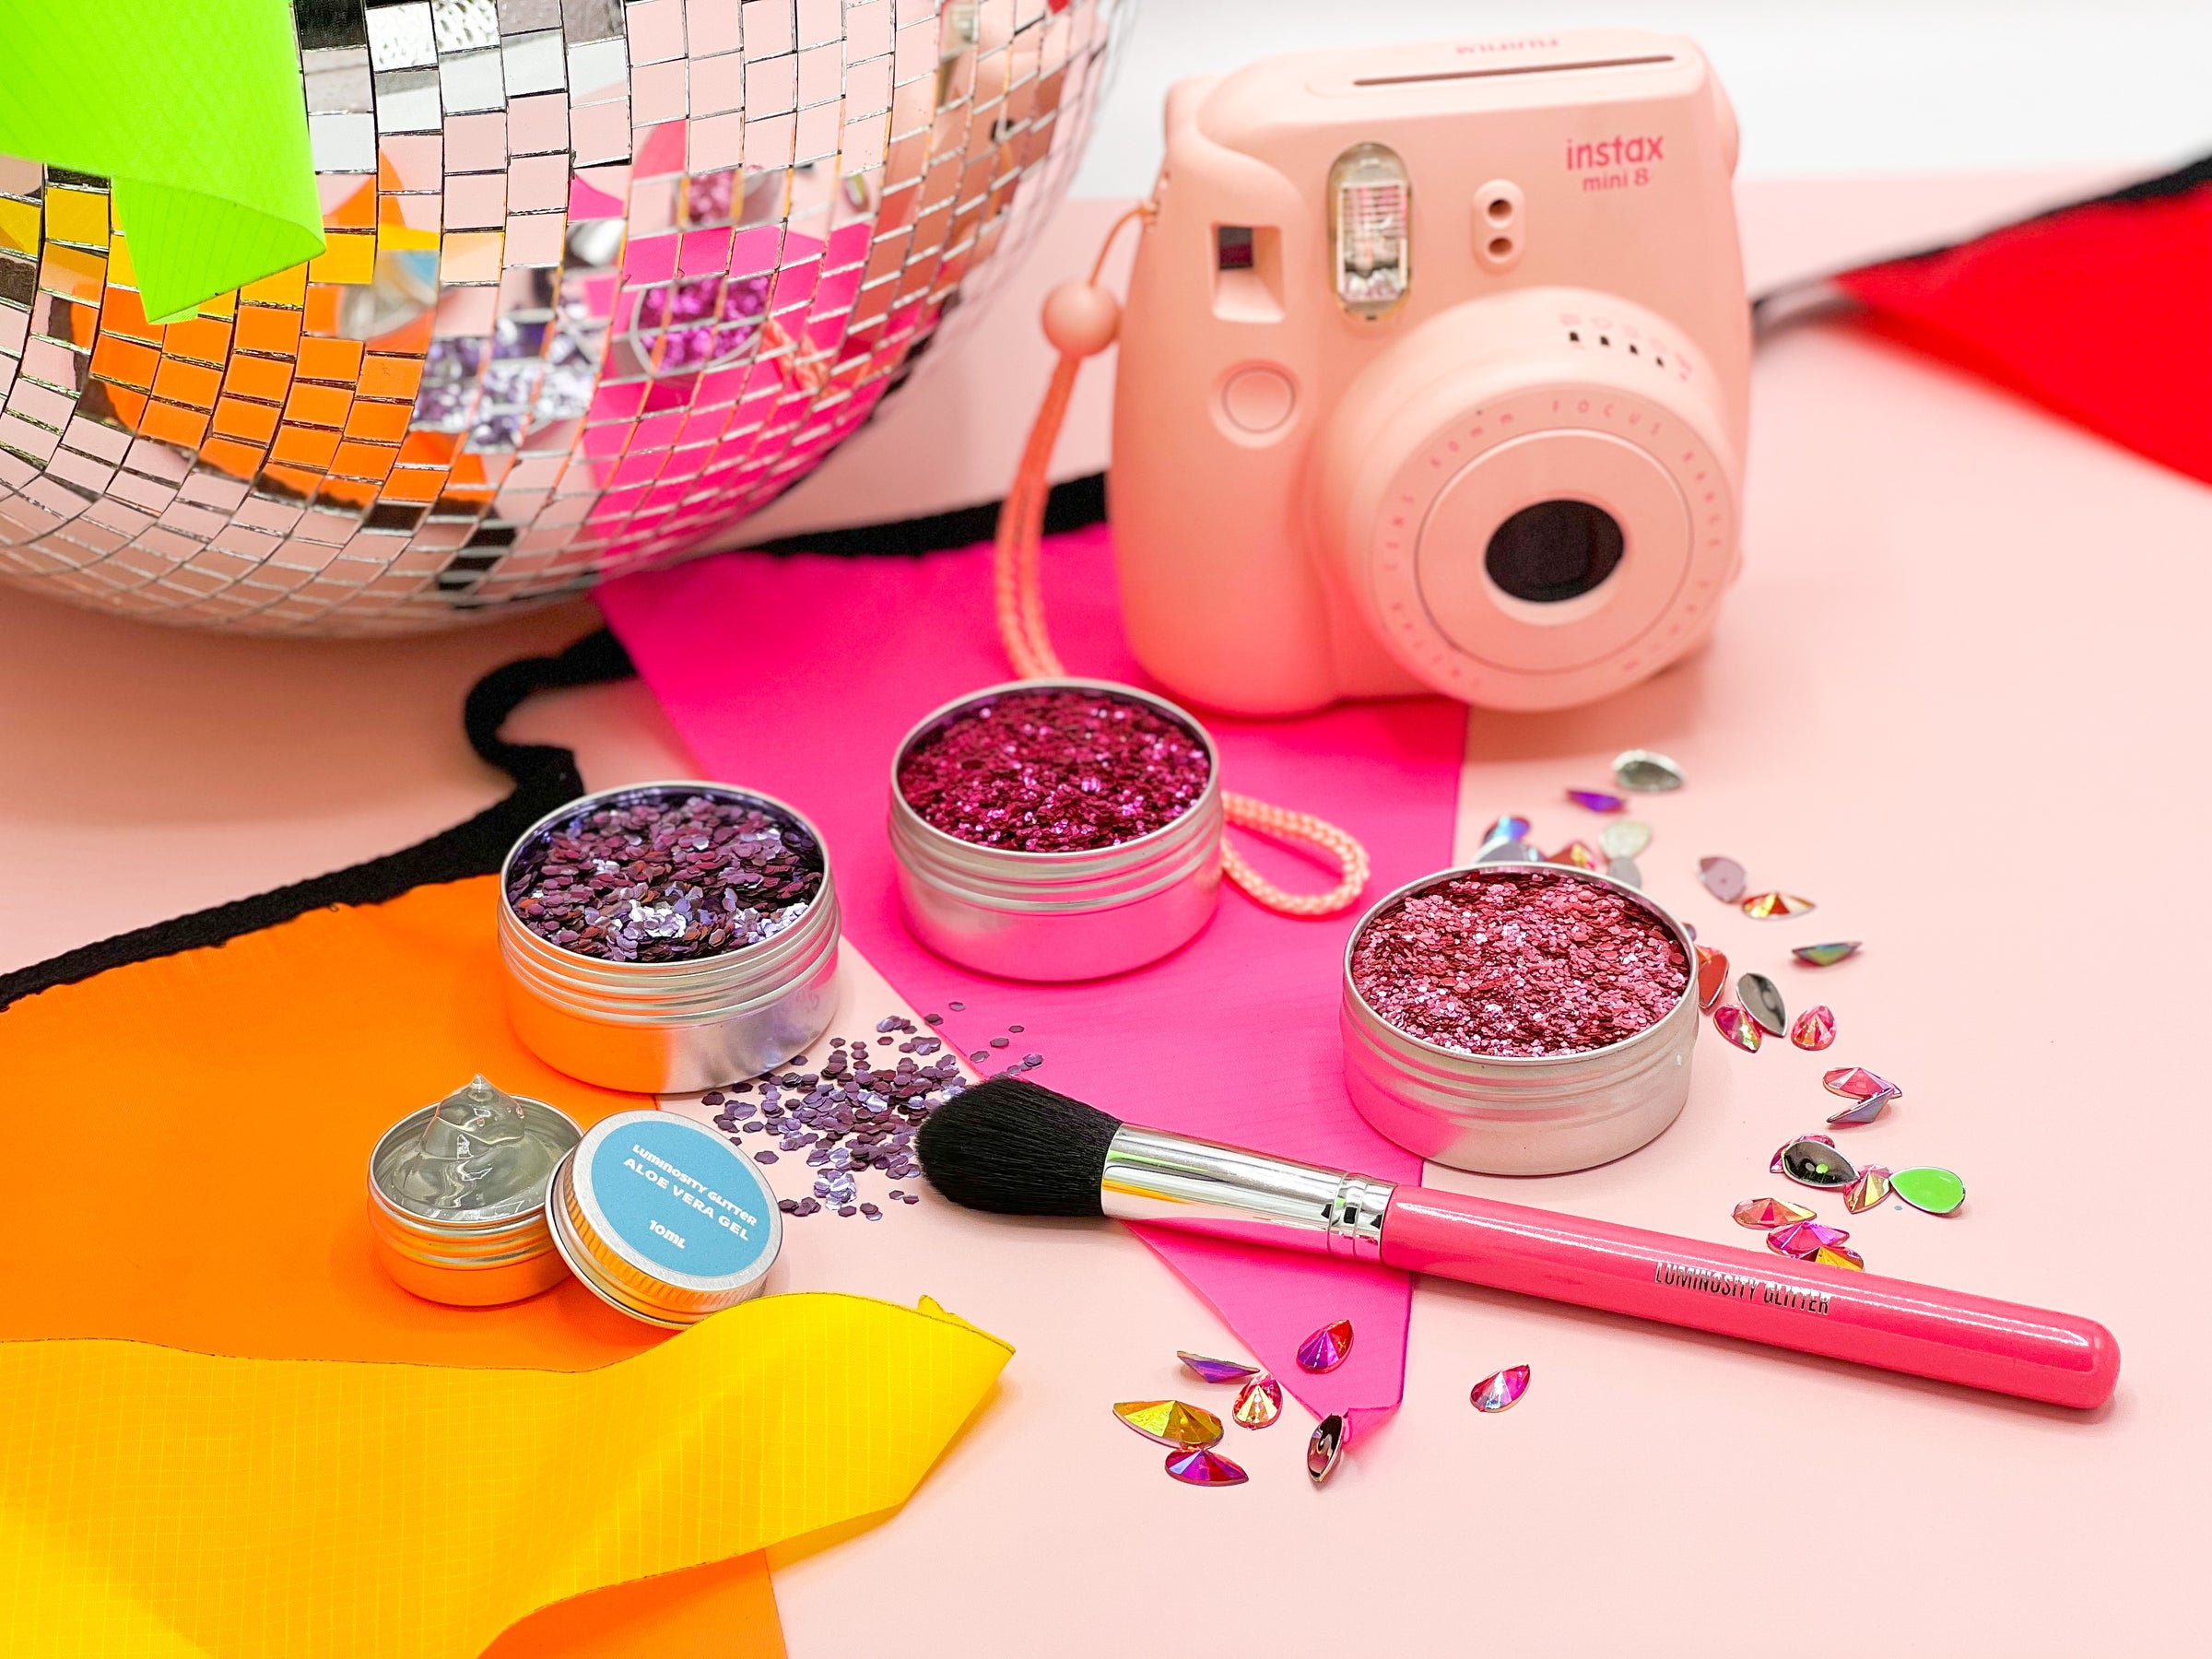 Neon bunting, a pink Polaroid camera and giant disco ball with eco glitter and a hot pink makeup brush. Sprinkled on a pink background are reusable face gems